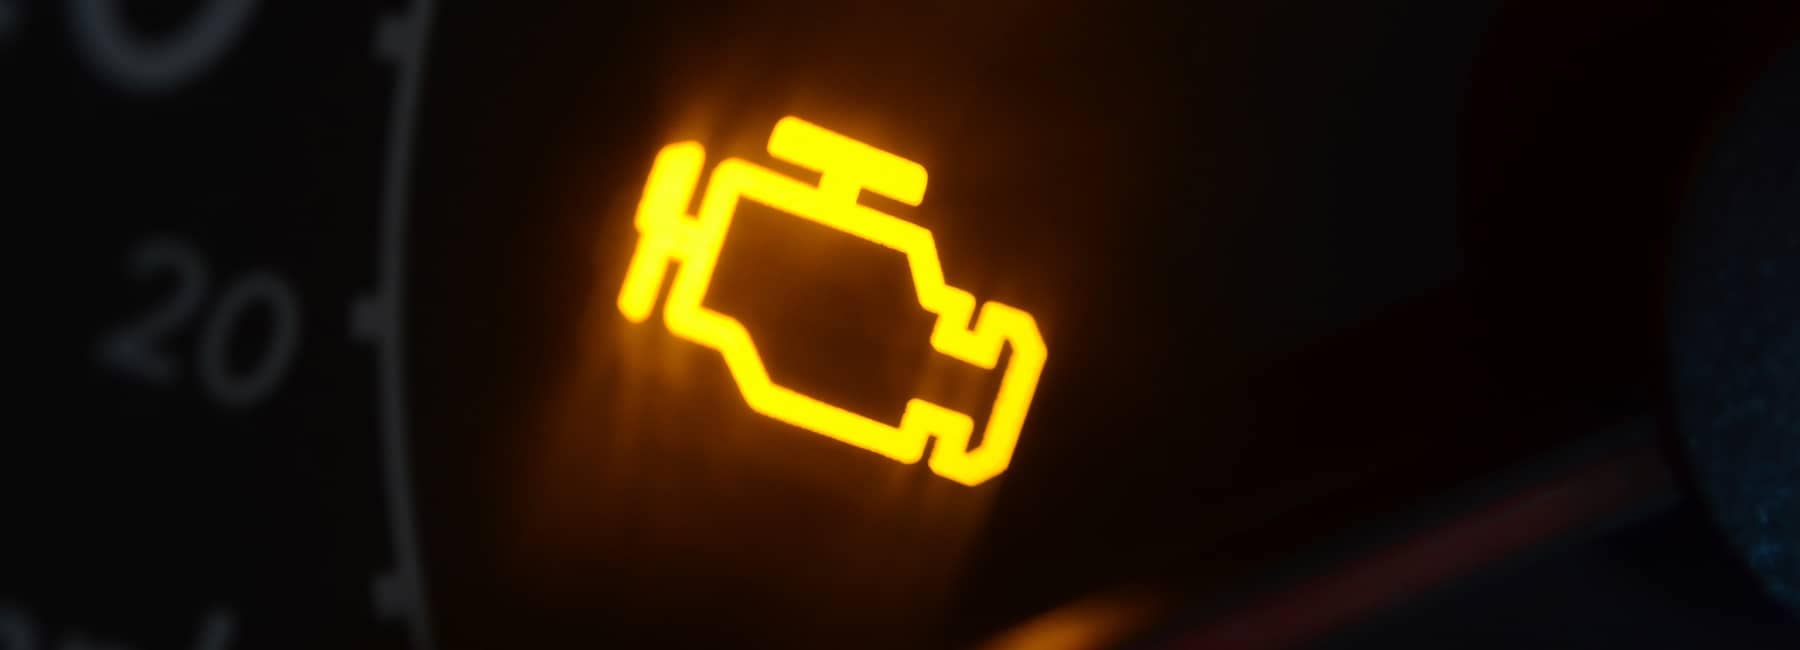 tolv Farmakologi Streng What Does Your Check Engine Light Mean? | Gwatney Chevrolet Company